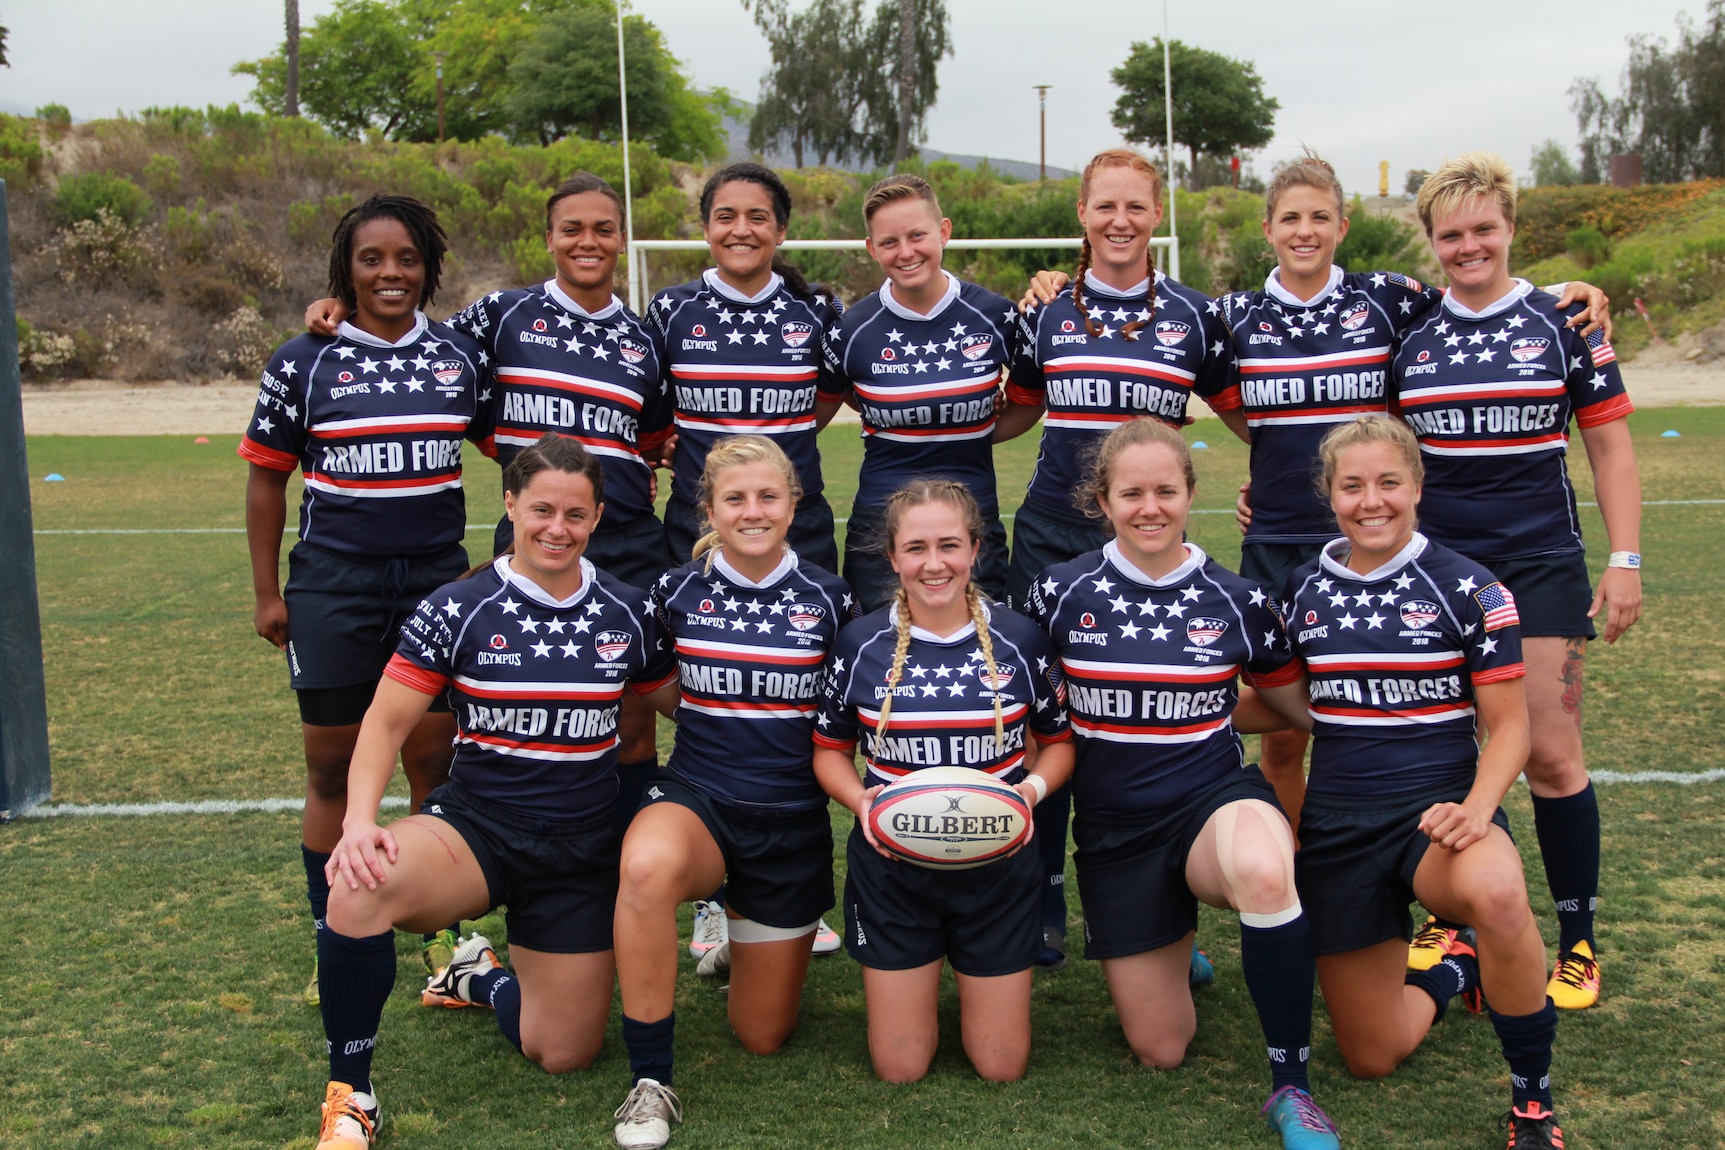 U.S. Armed Forces Women's Rugby Team